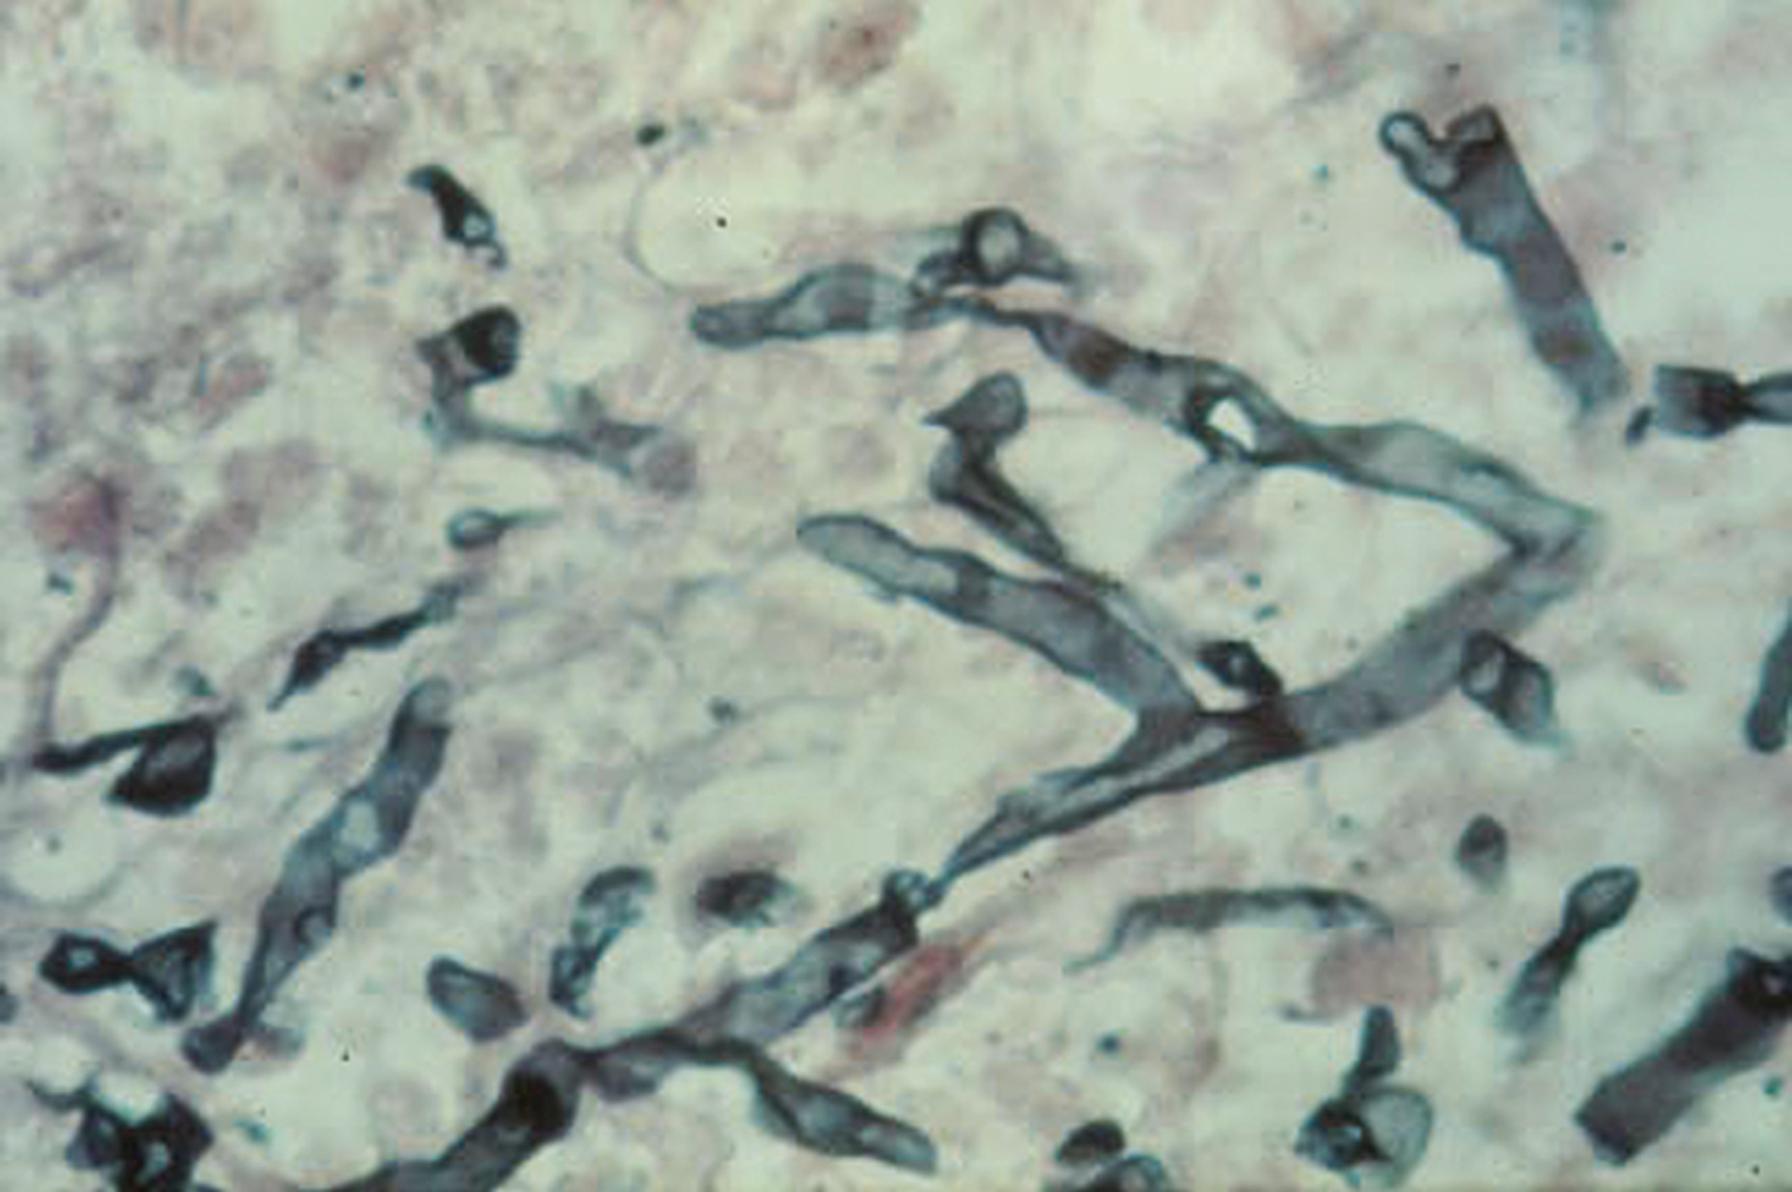 Fig. 60.3, Characteristic wide, nonseptate hypha of a mucormycete in lung tissue.